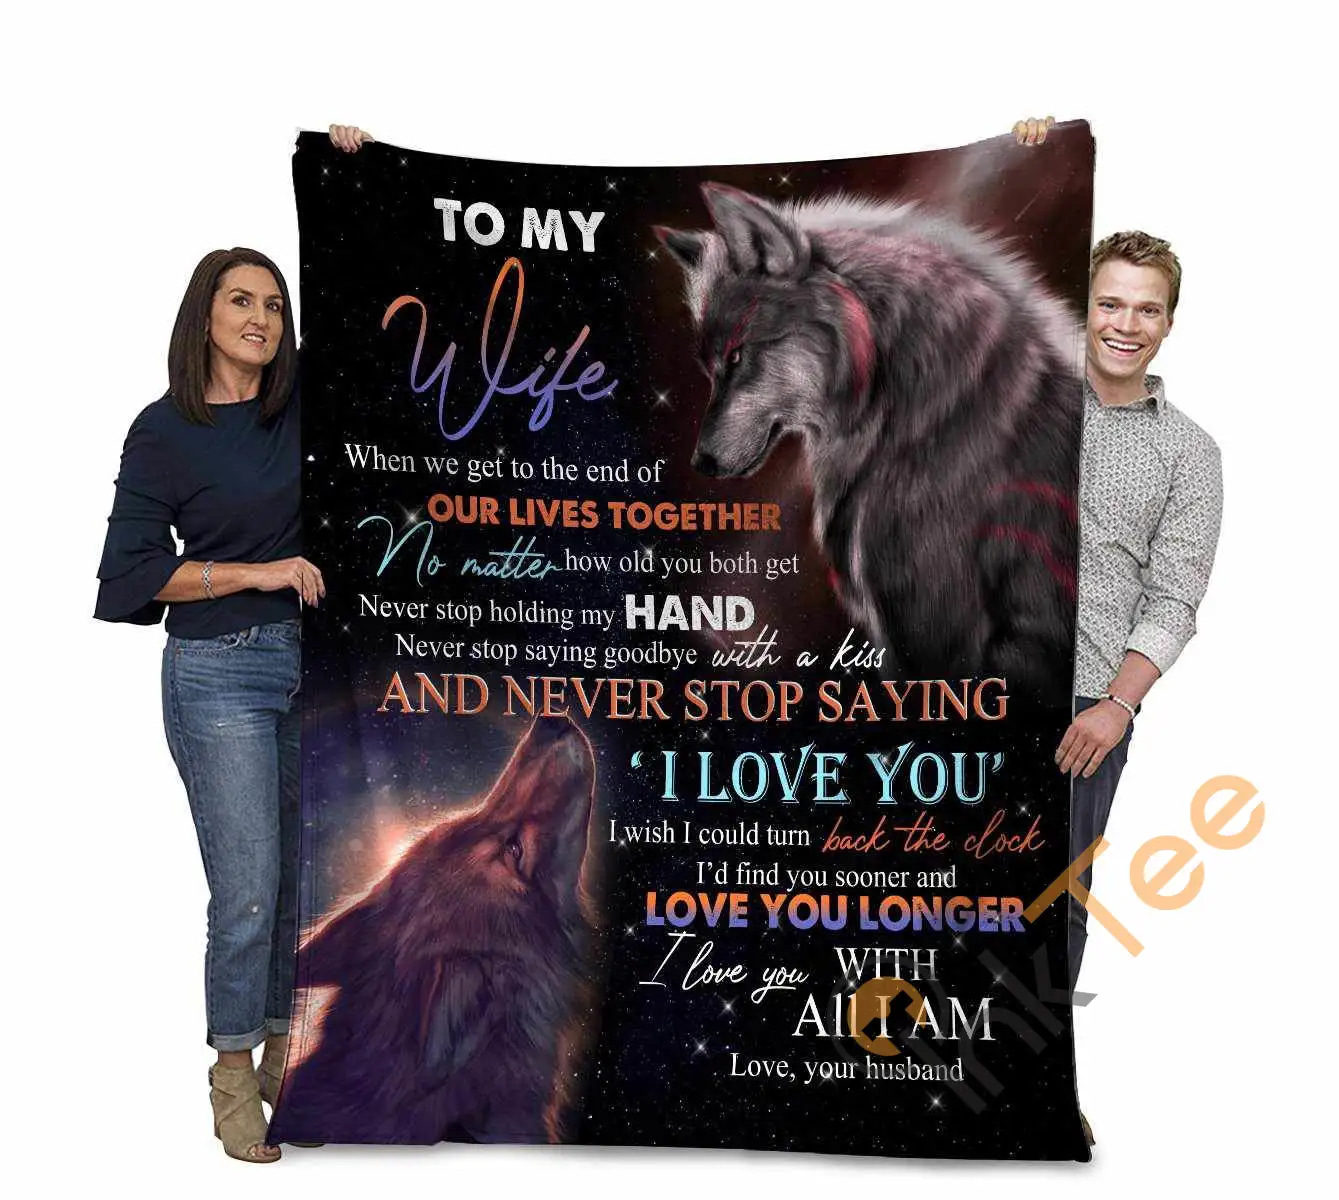 To My Wife When We Get To The End Of Our Lives Together I Love You With All I Am Grey Wolf Couple Ultra Soft Cozy Plush Fleece Blanket